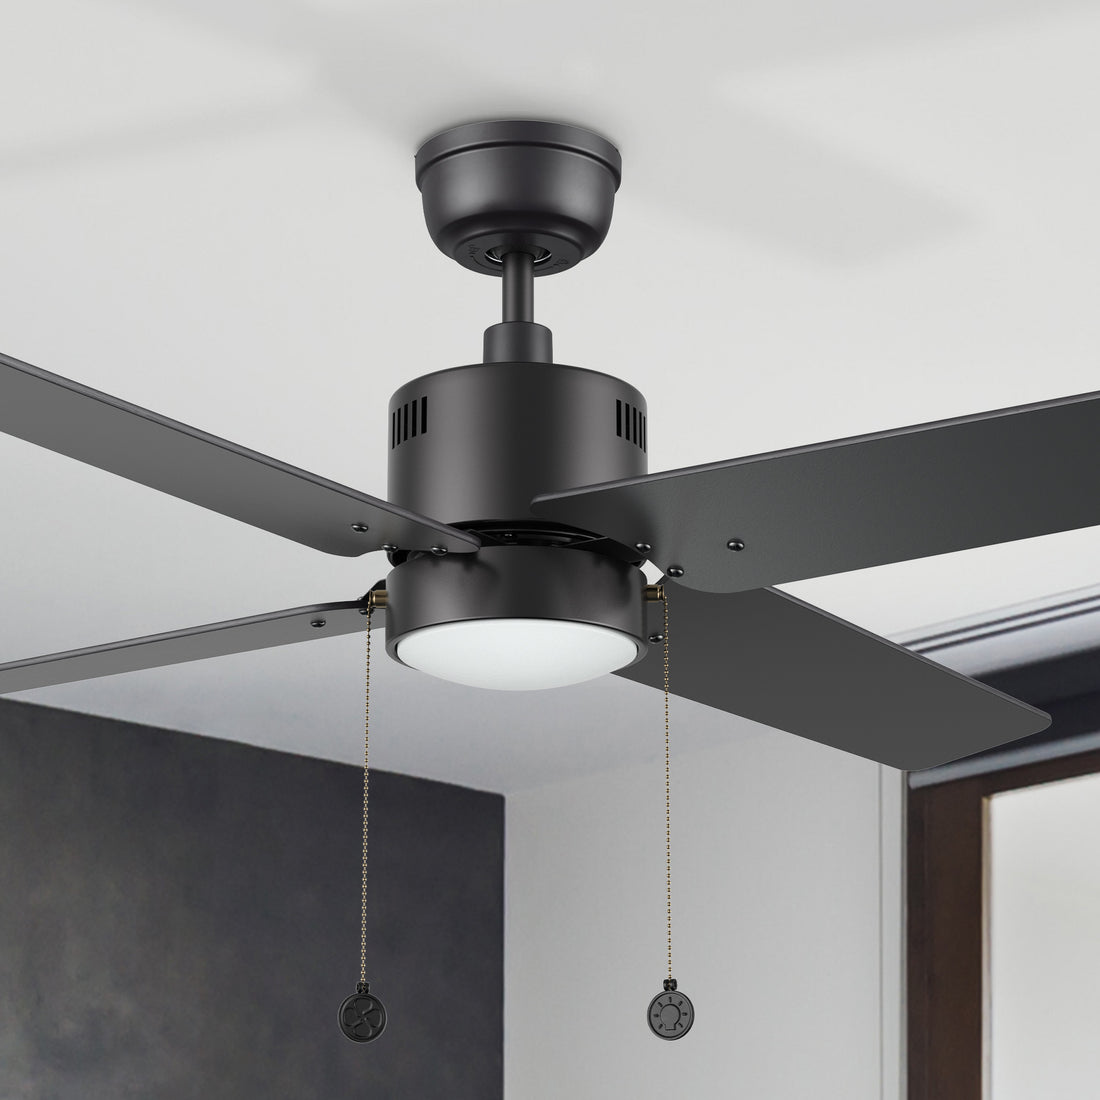 Carro Rowan 52 inch modern ceiling fan with LED light in a black finish, showcased in a spacious open living area.